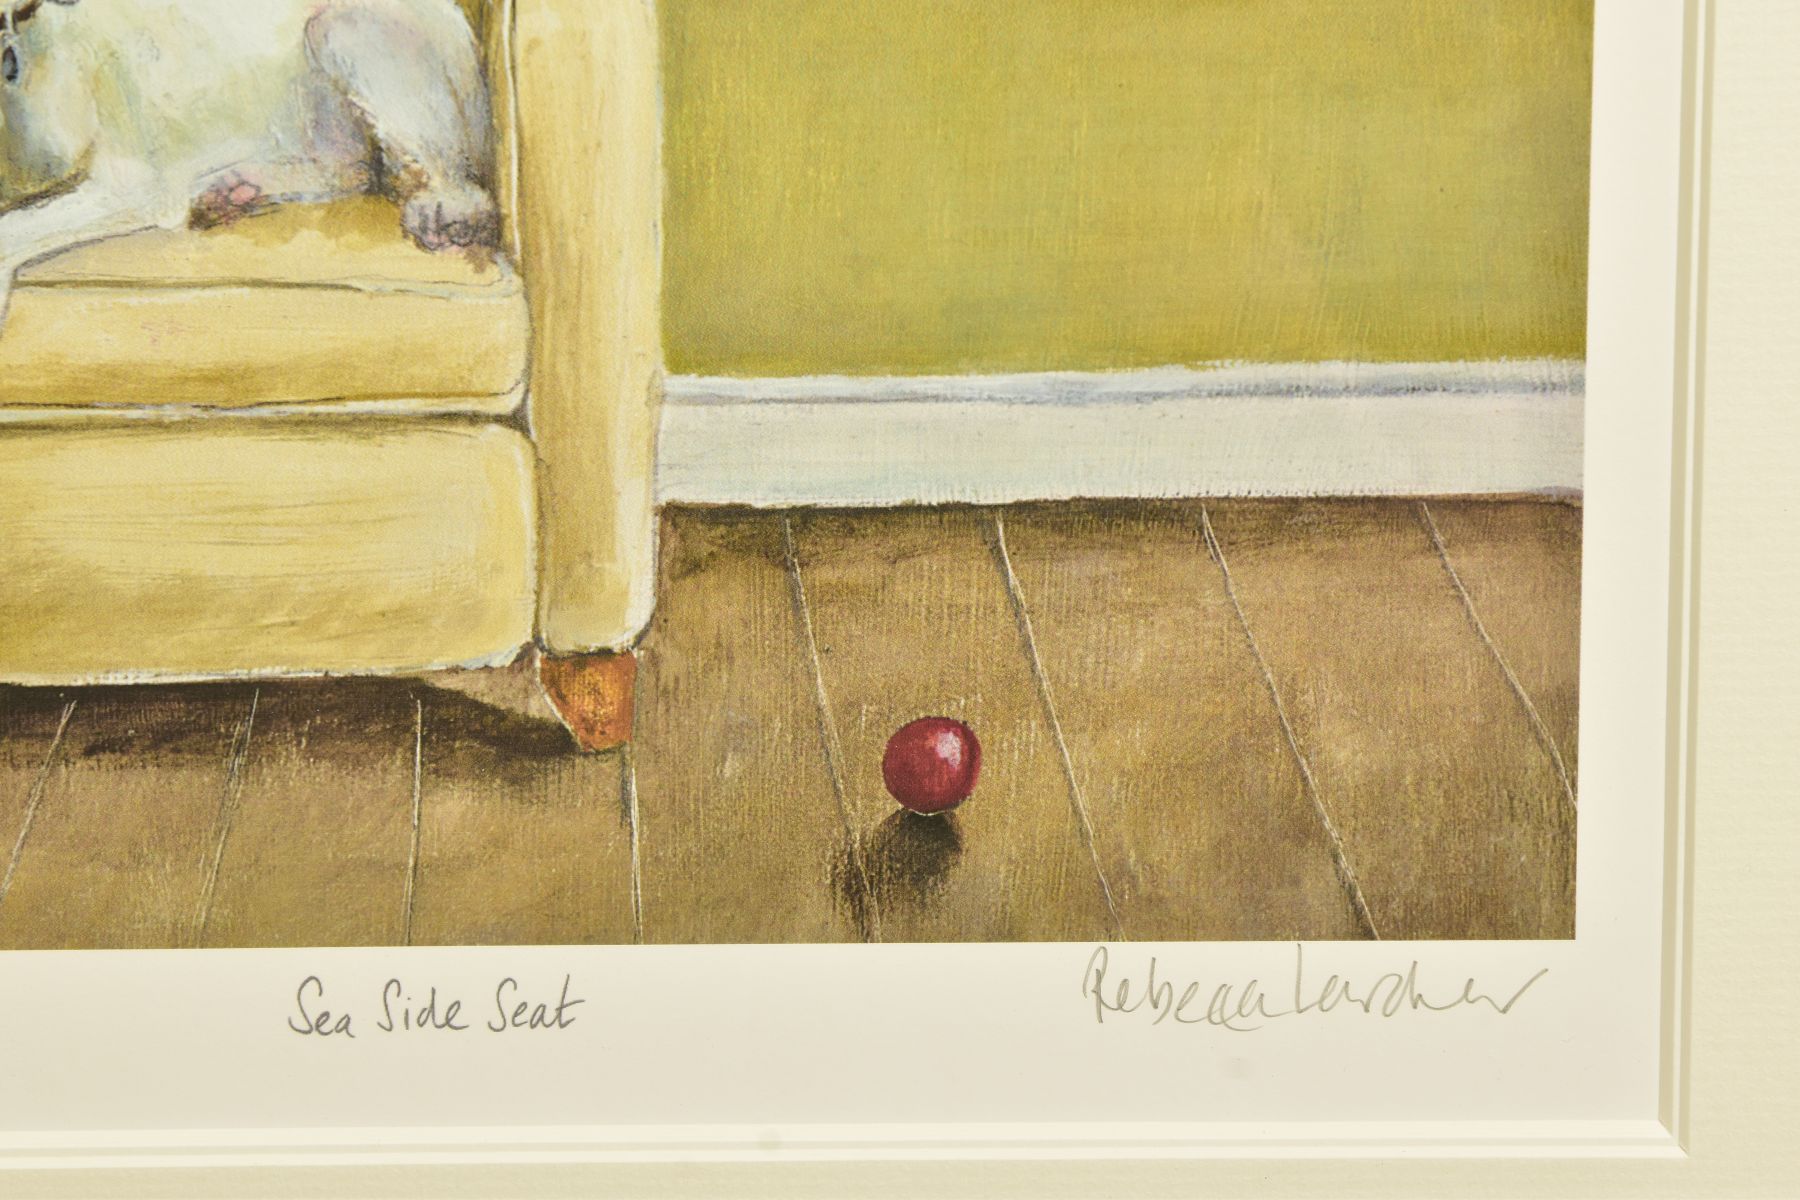 REBECCA LARDNER (BRITISH 1971) 'SEASIDE SEAT' a limited edition print of a dog on a chair 58/195, - Image 4 of 10